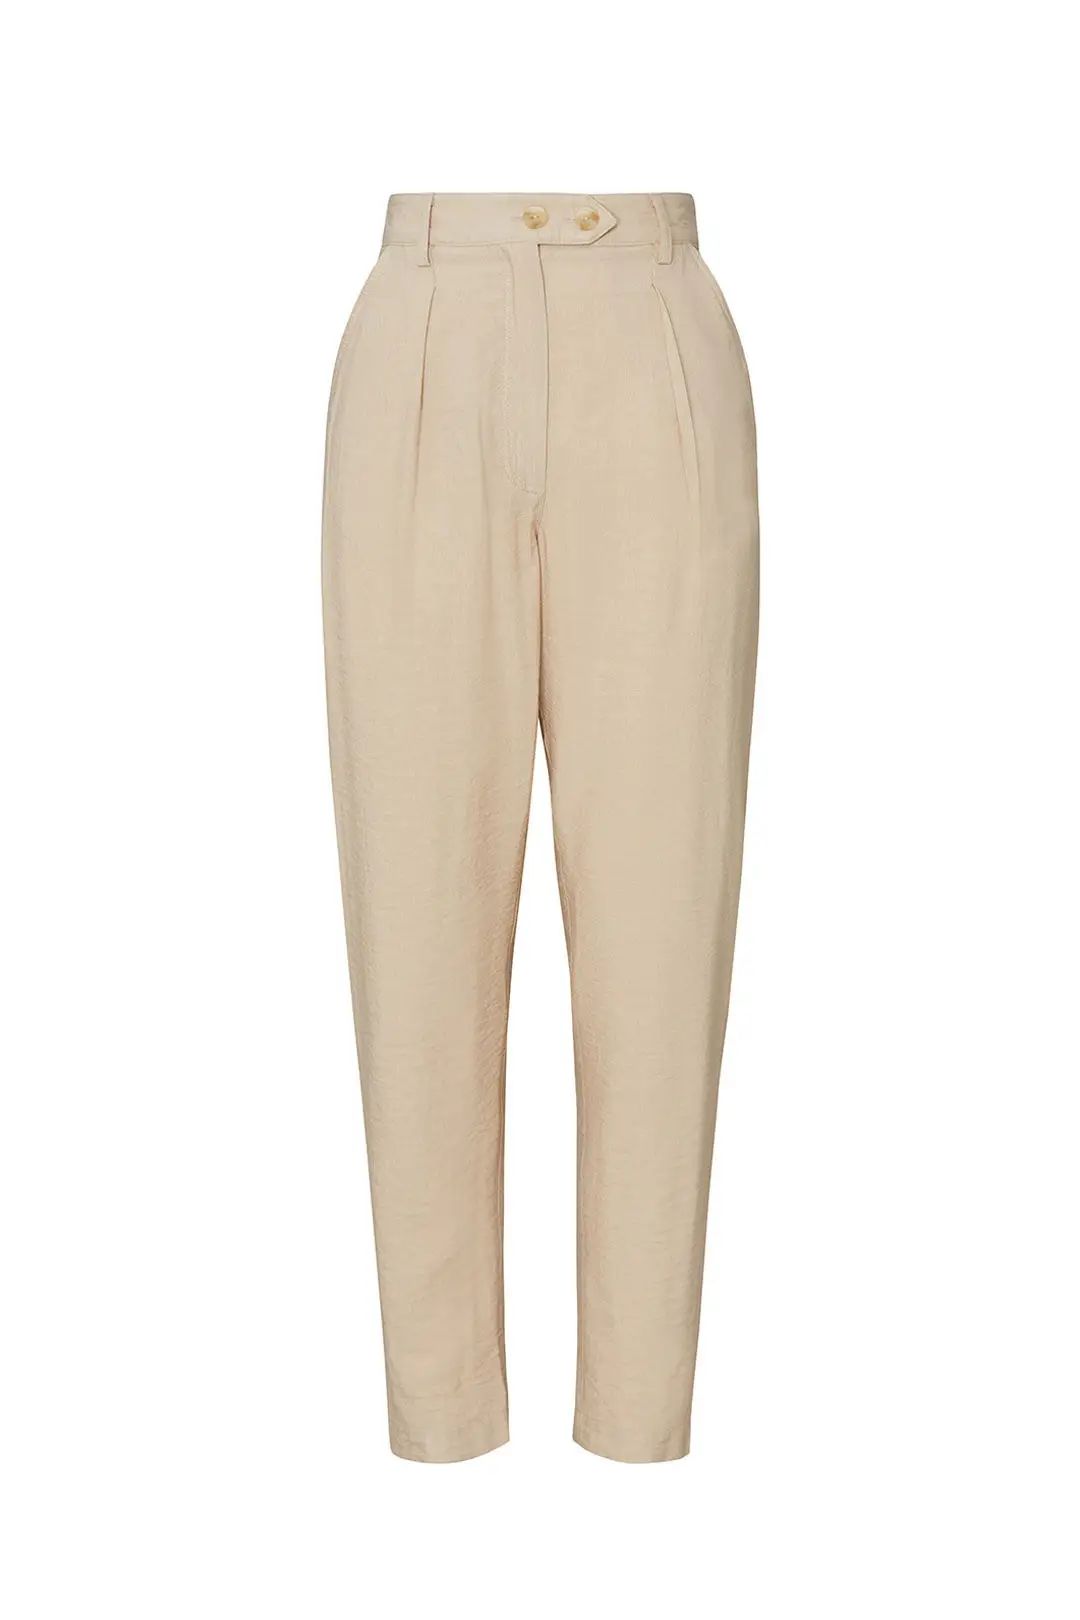 Love, Whit by Whitney Port Beige Tailored Pants | Rent the Runway